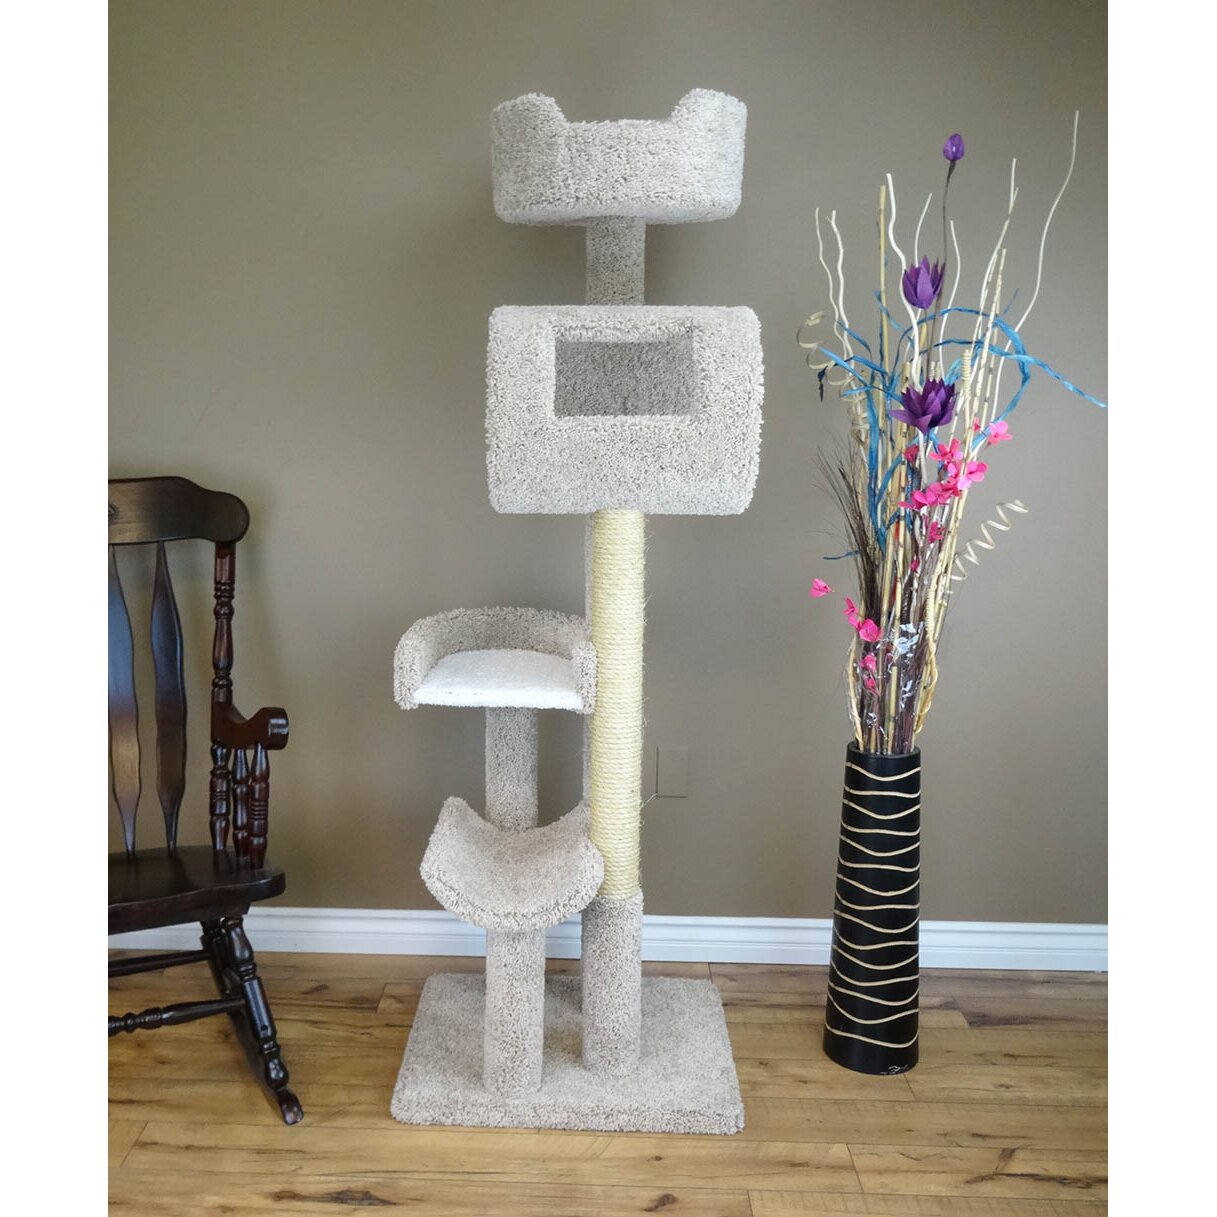 Cat Condo for apple download free